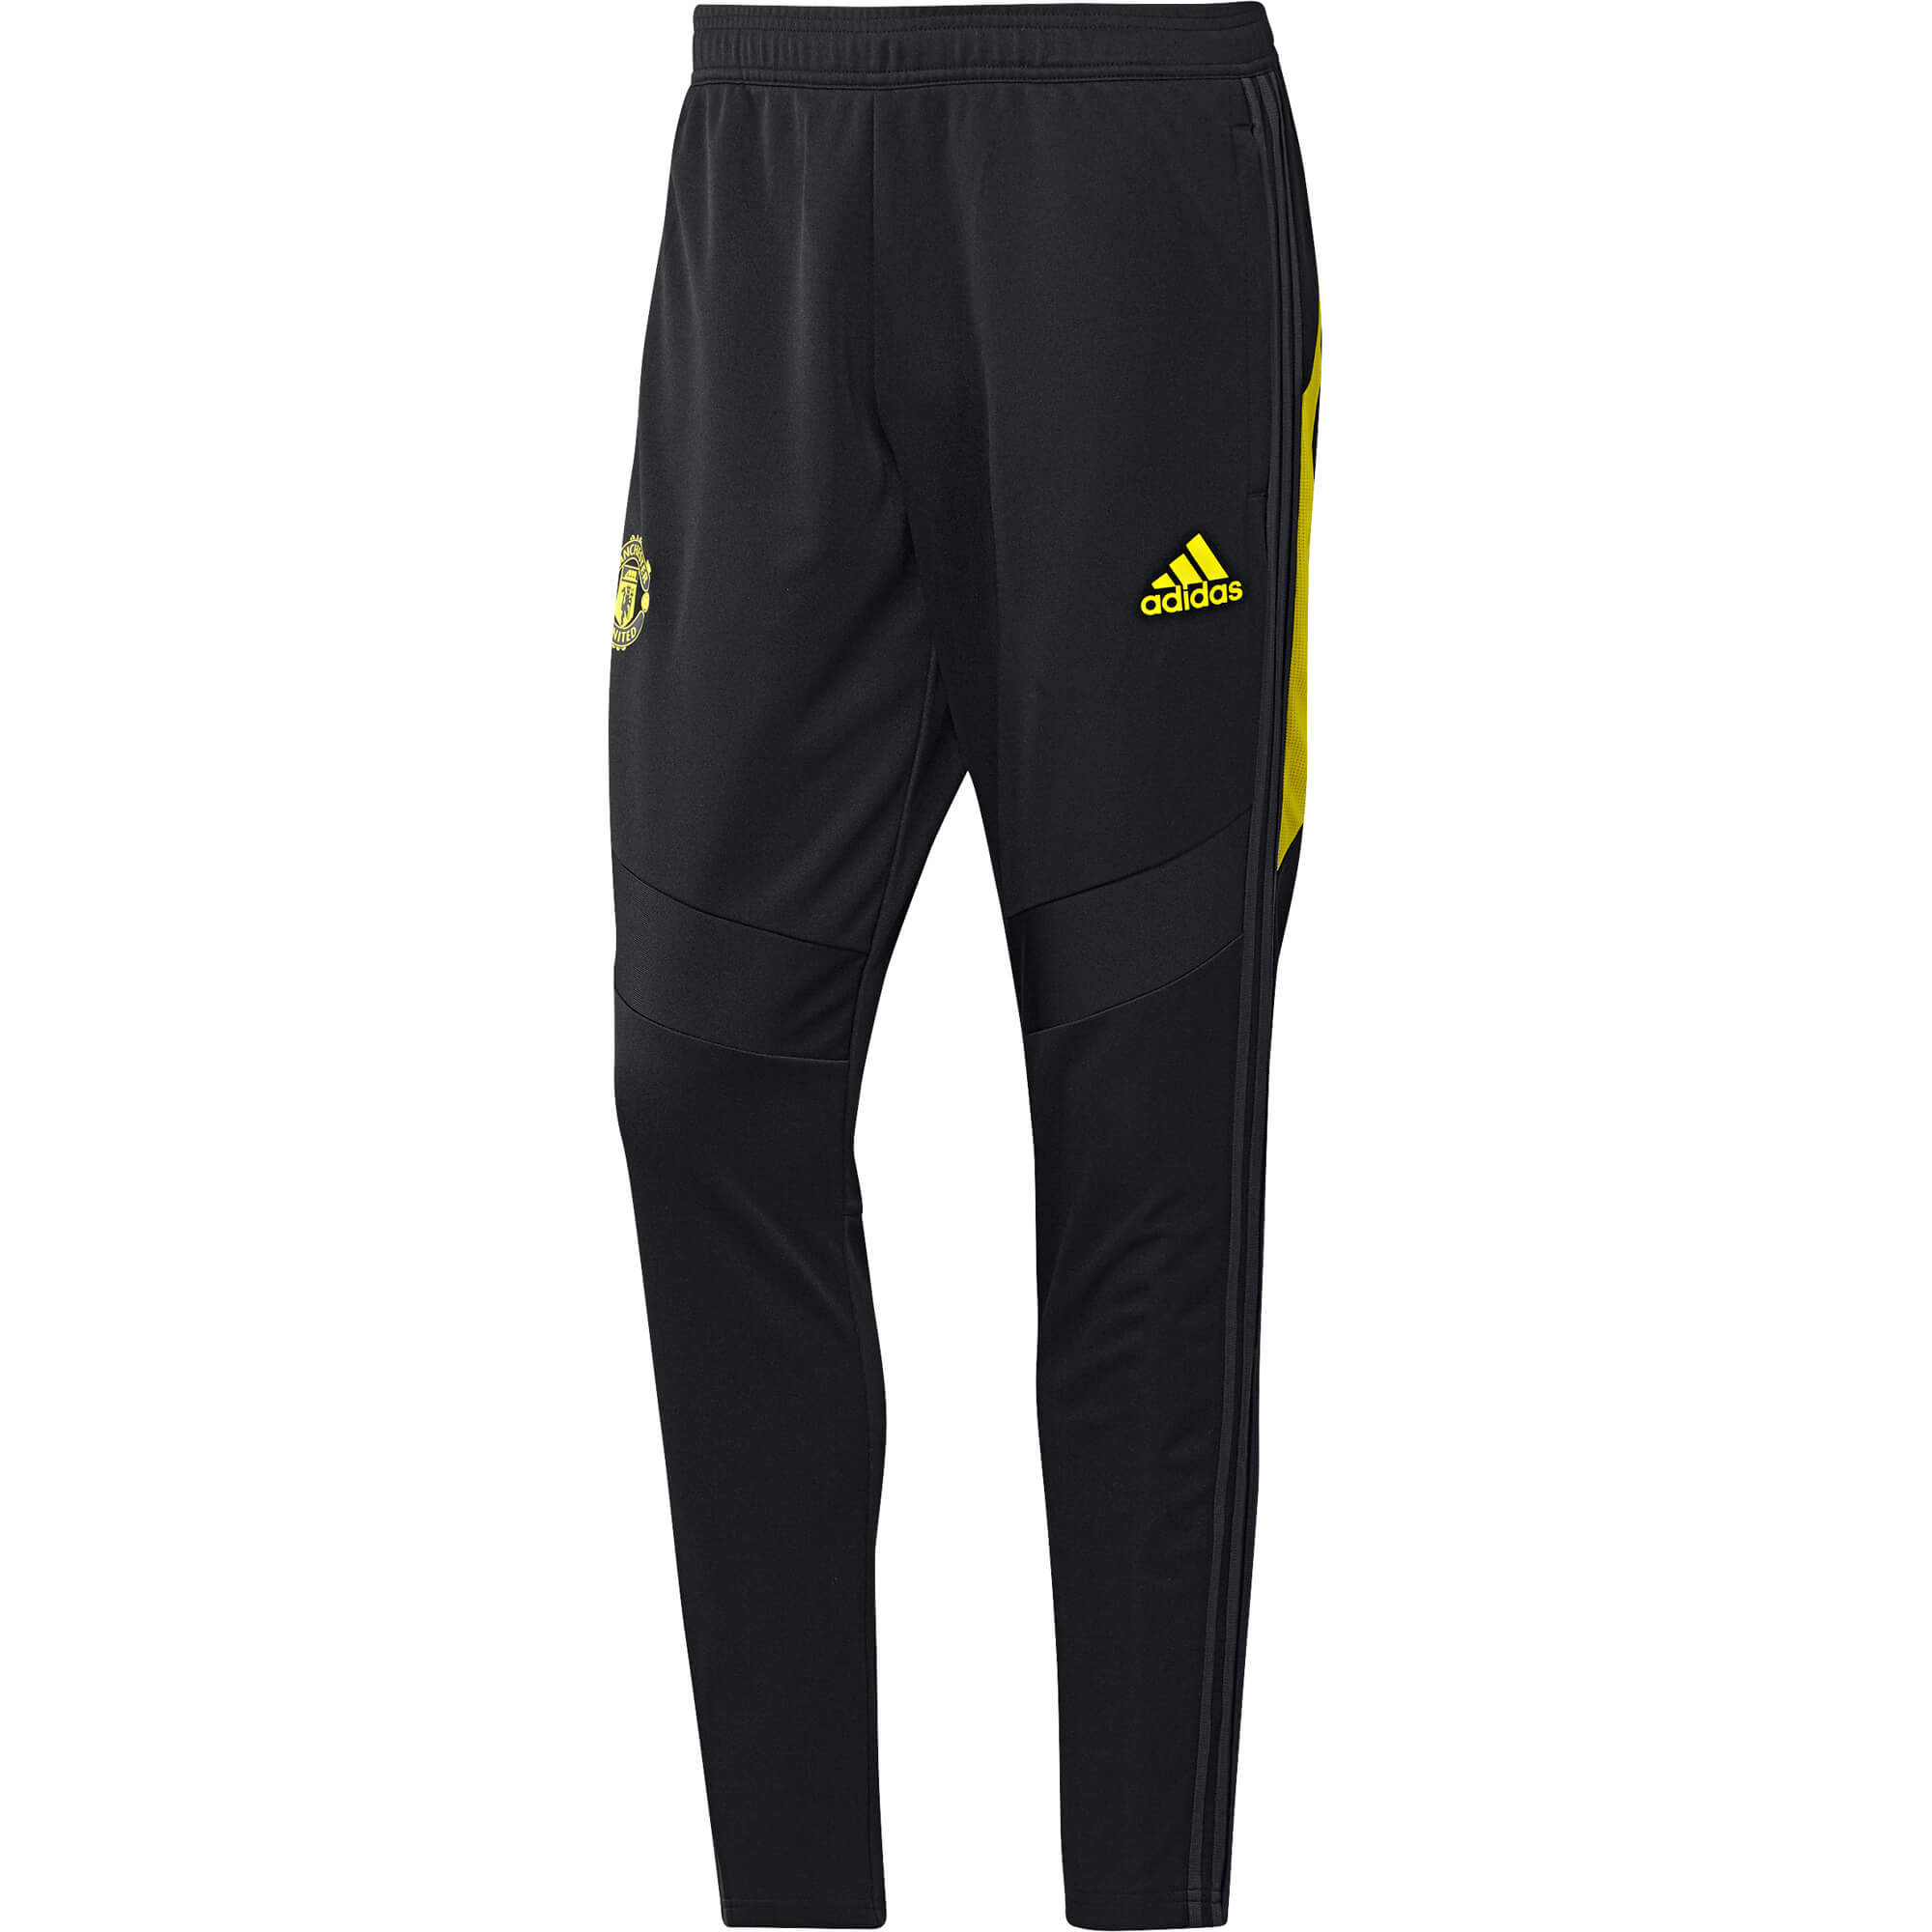 ADIDAS MANCHESTER UNITED TRG PANT NOIR 2019/2020